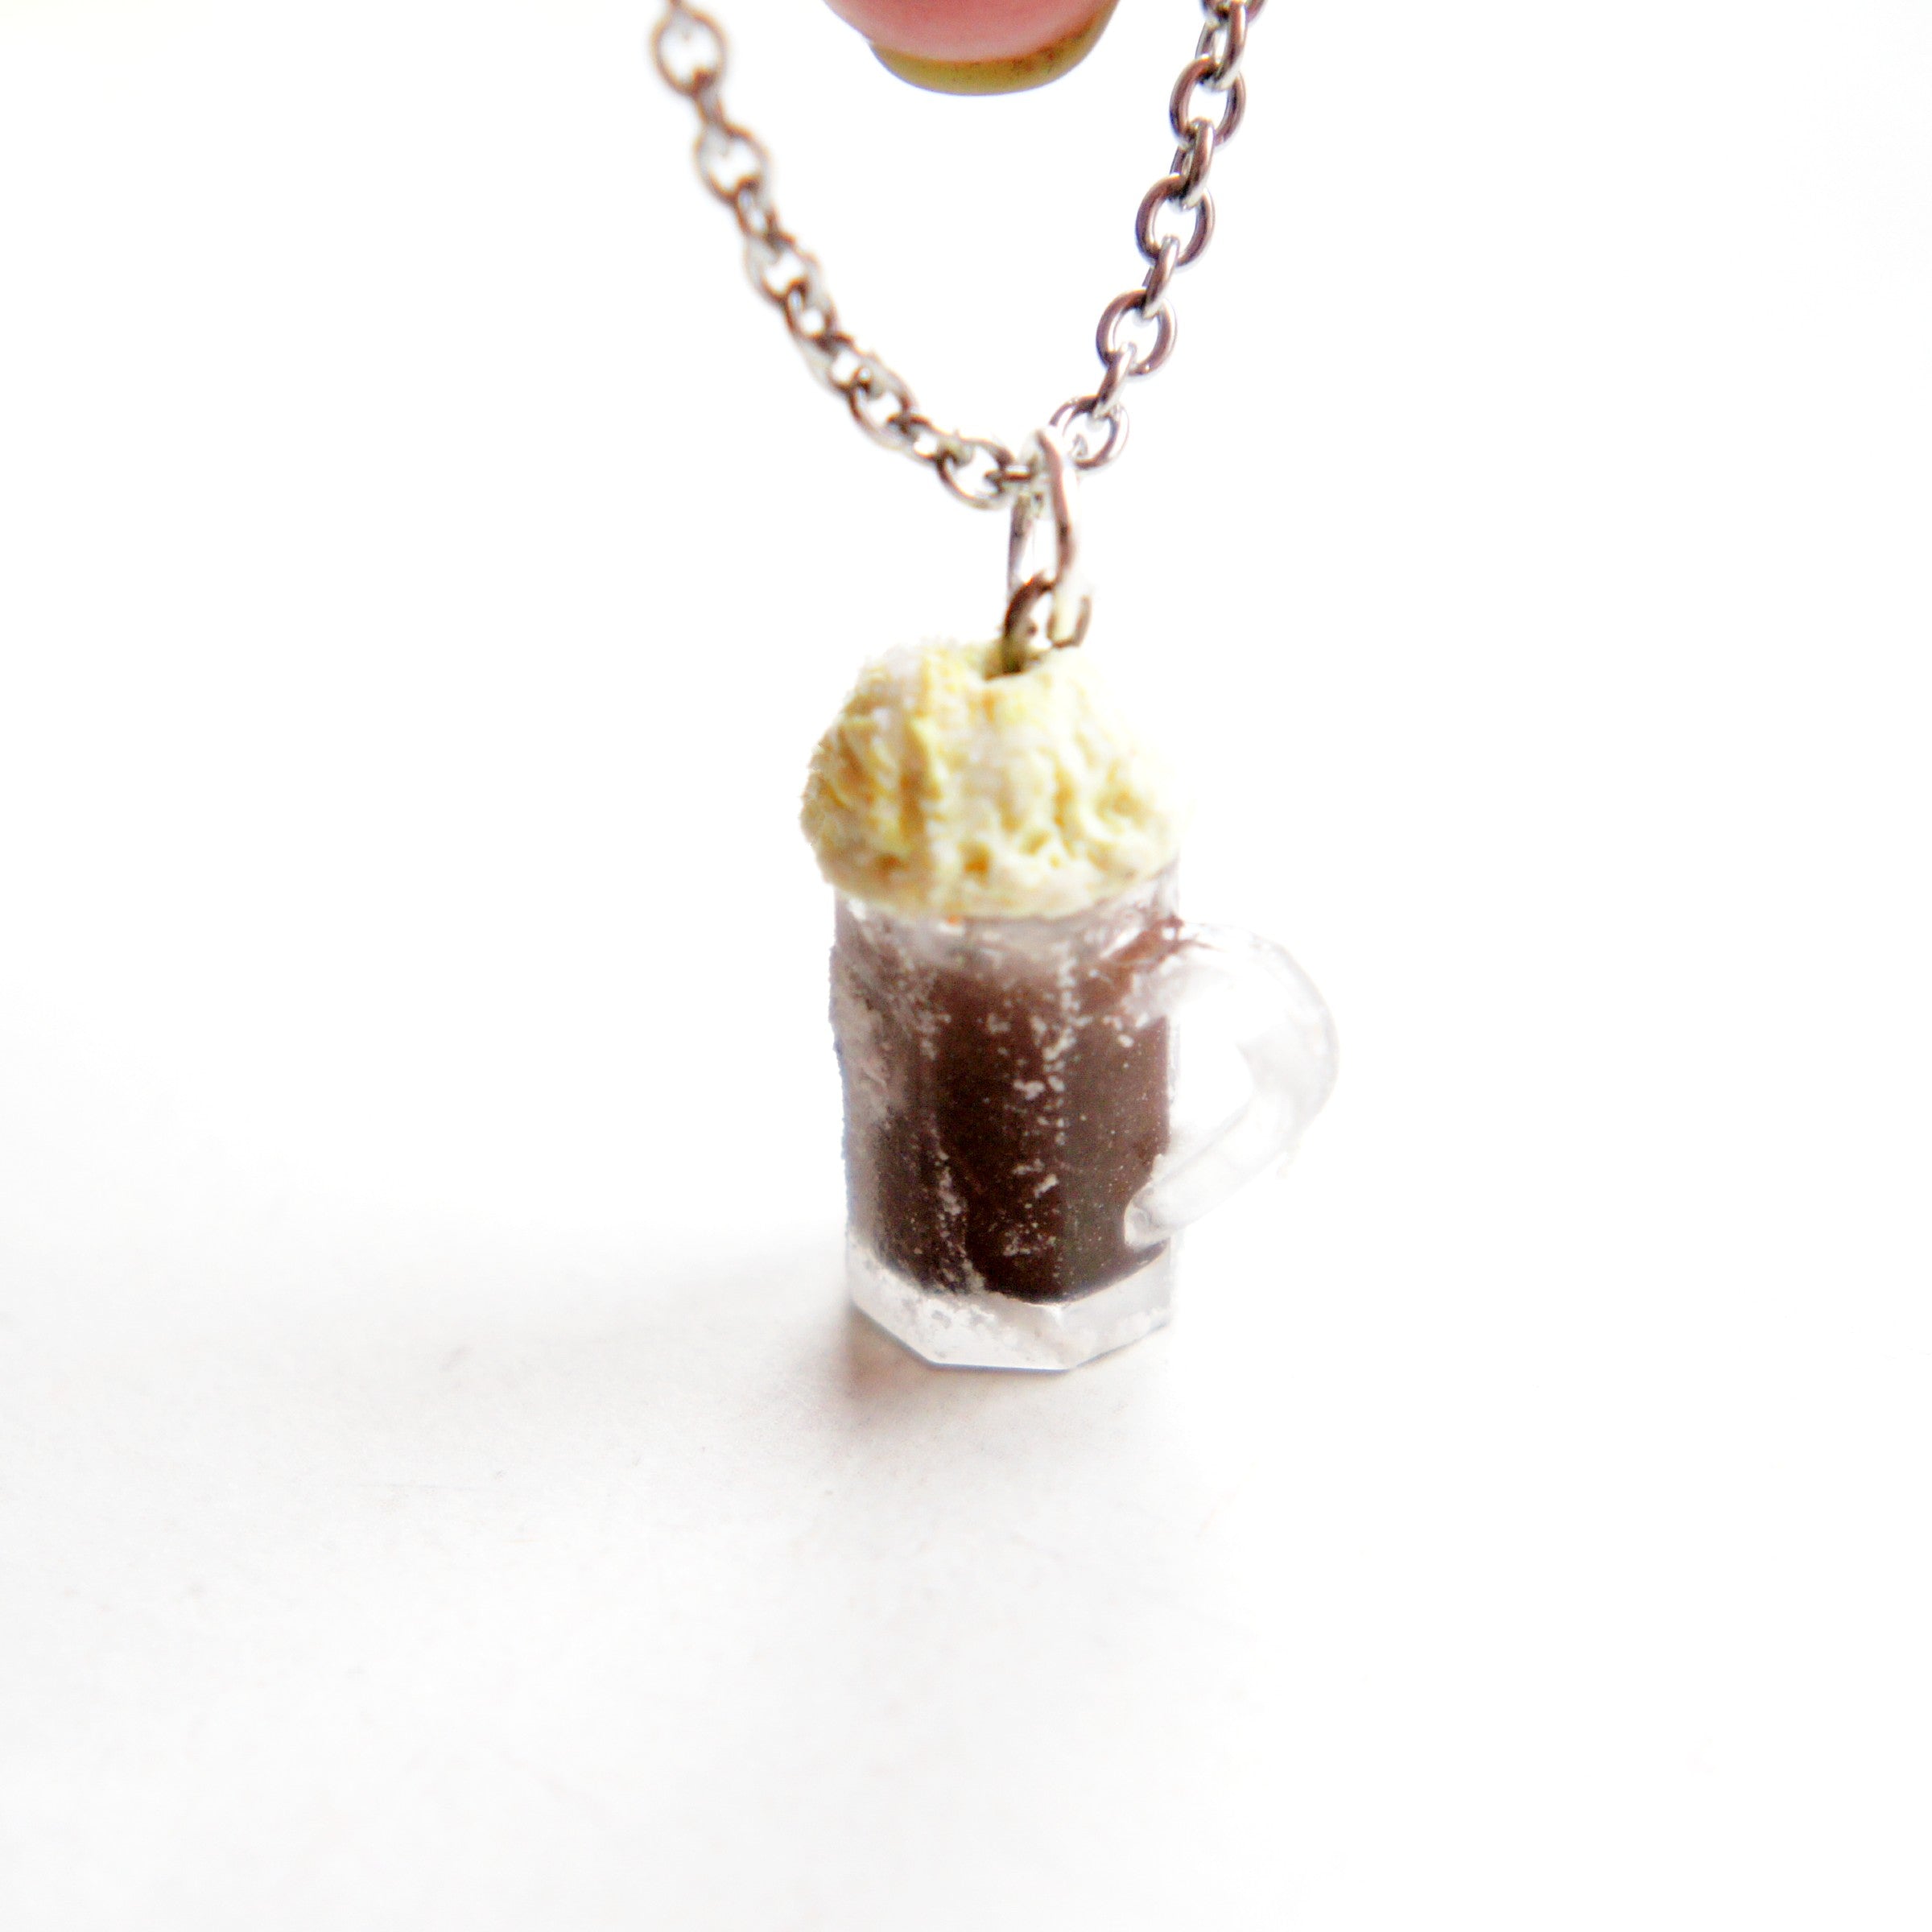 Root beer Float Necklace - Jillicious charms and accessories